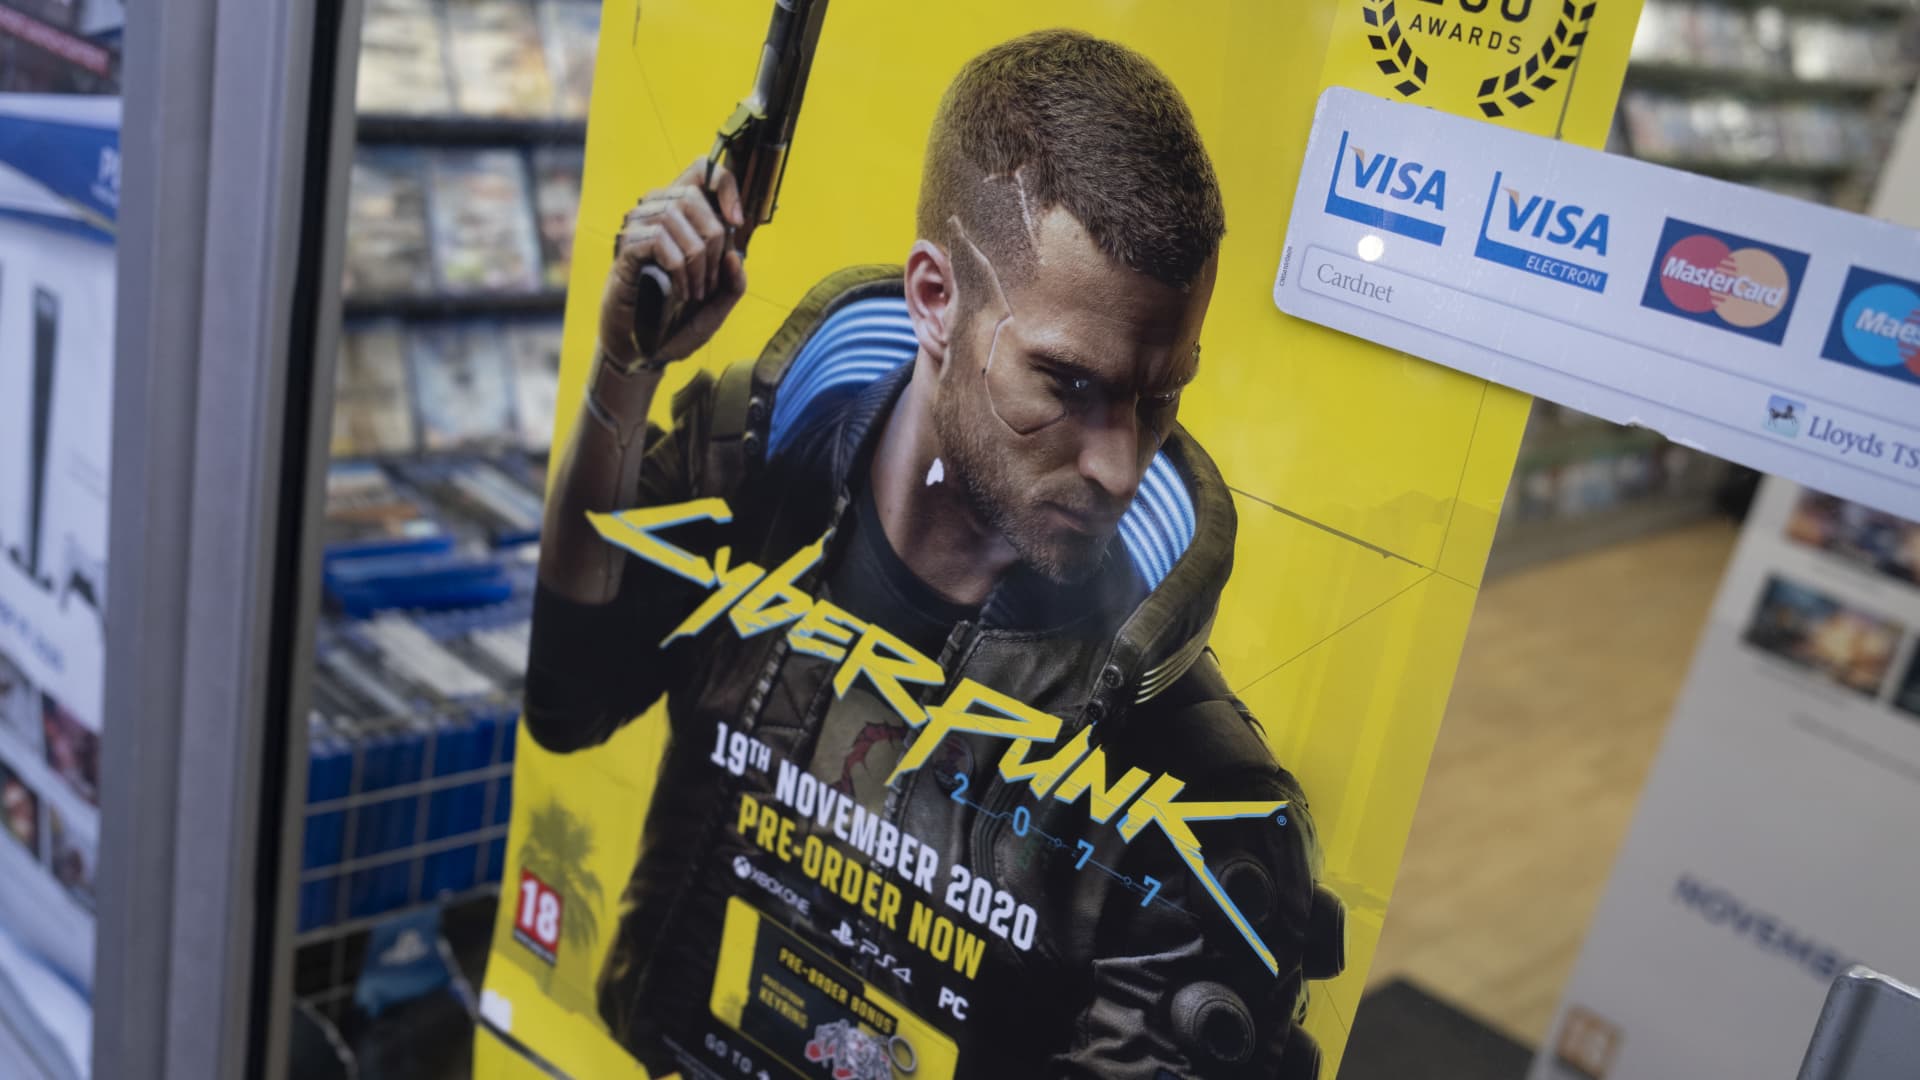 Cyberpunk publisher CD Projekt stock rises after announcing new games